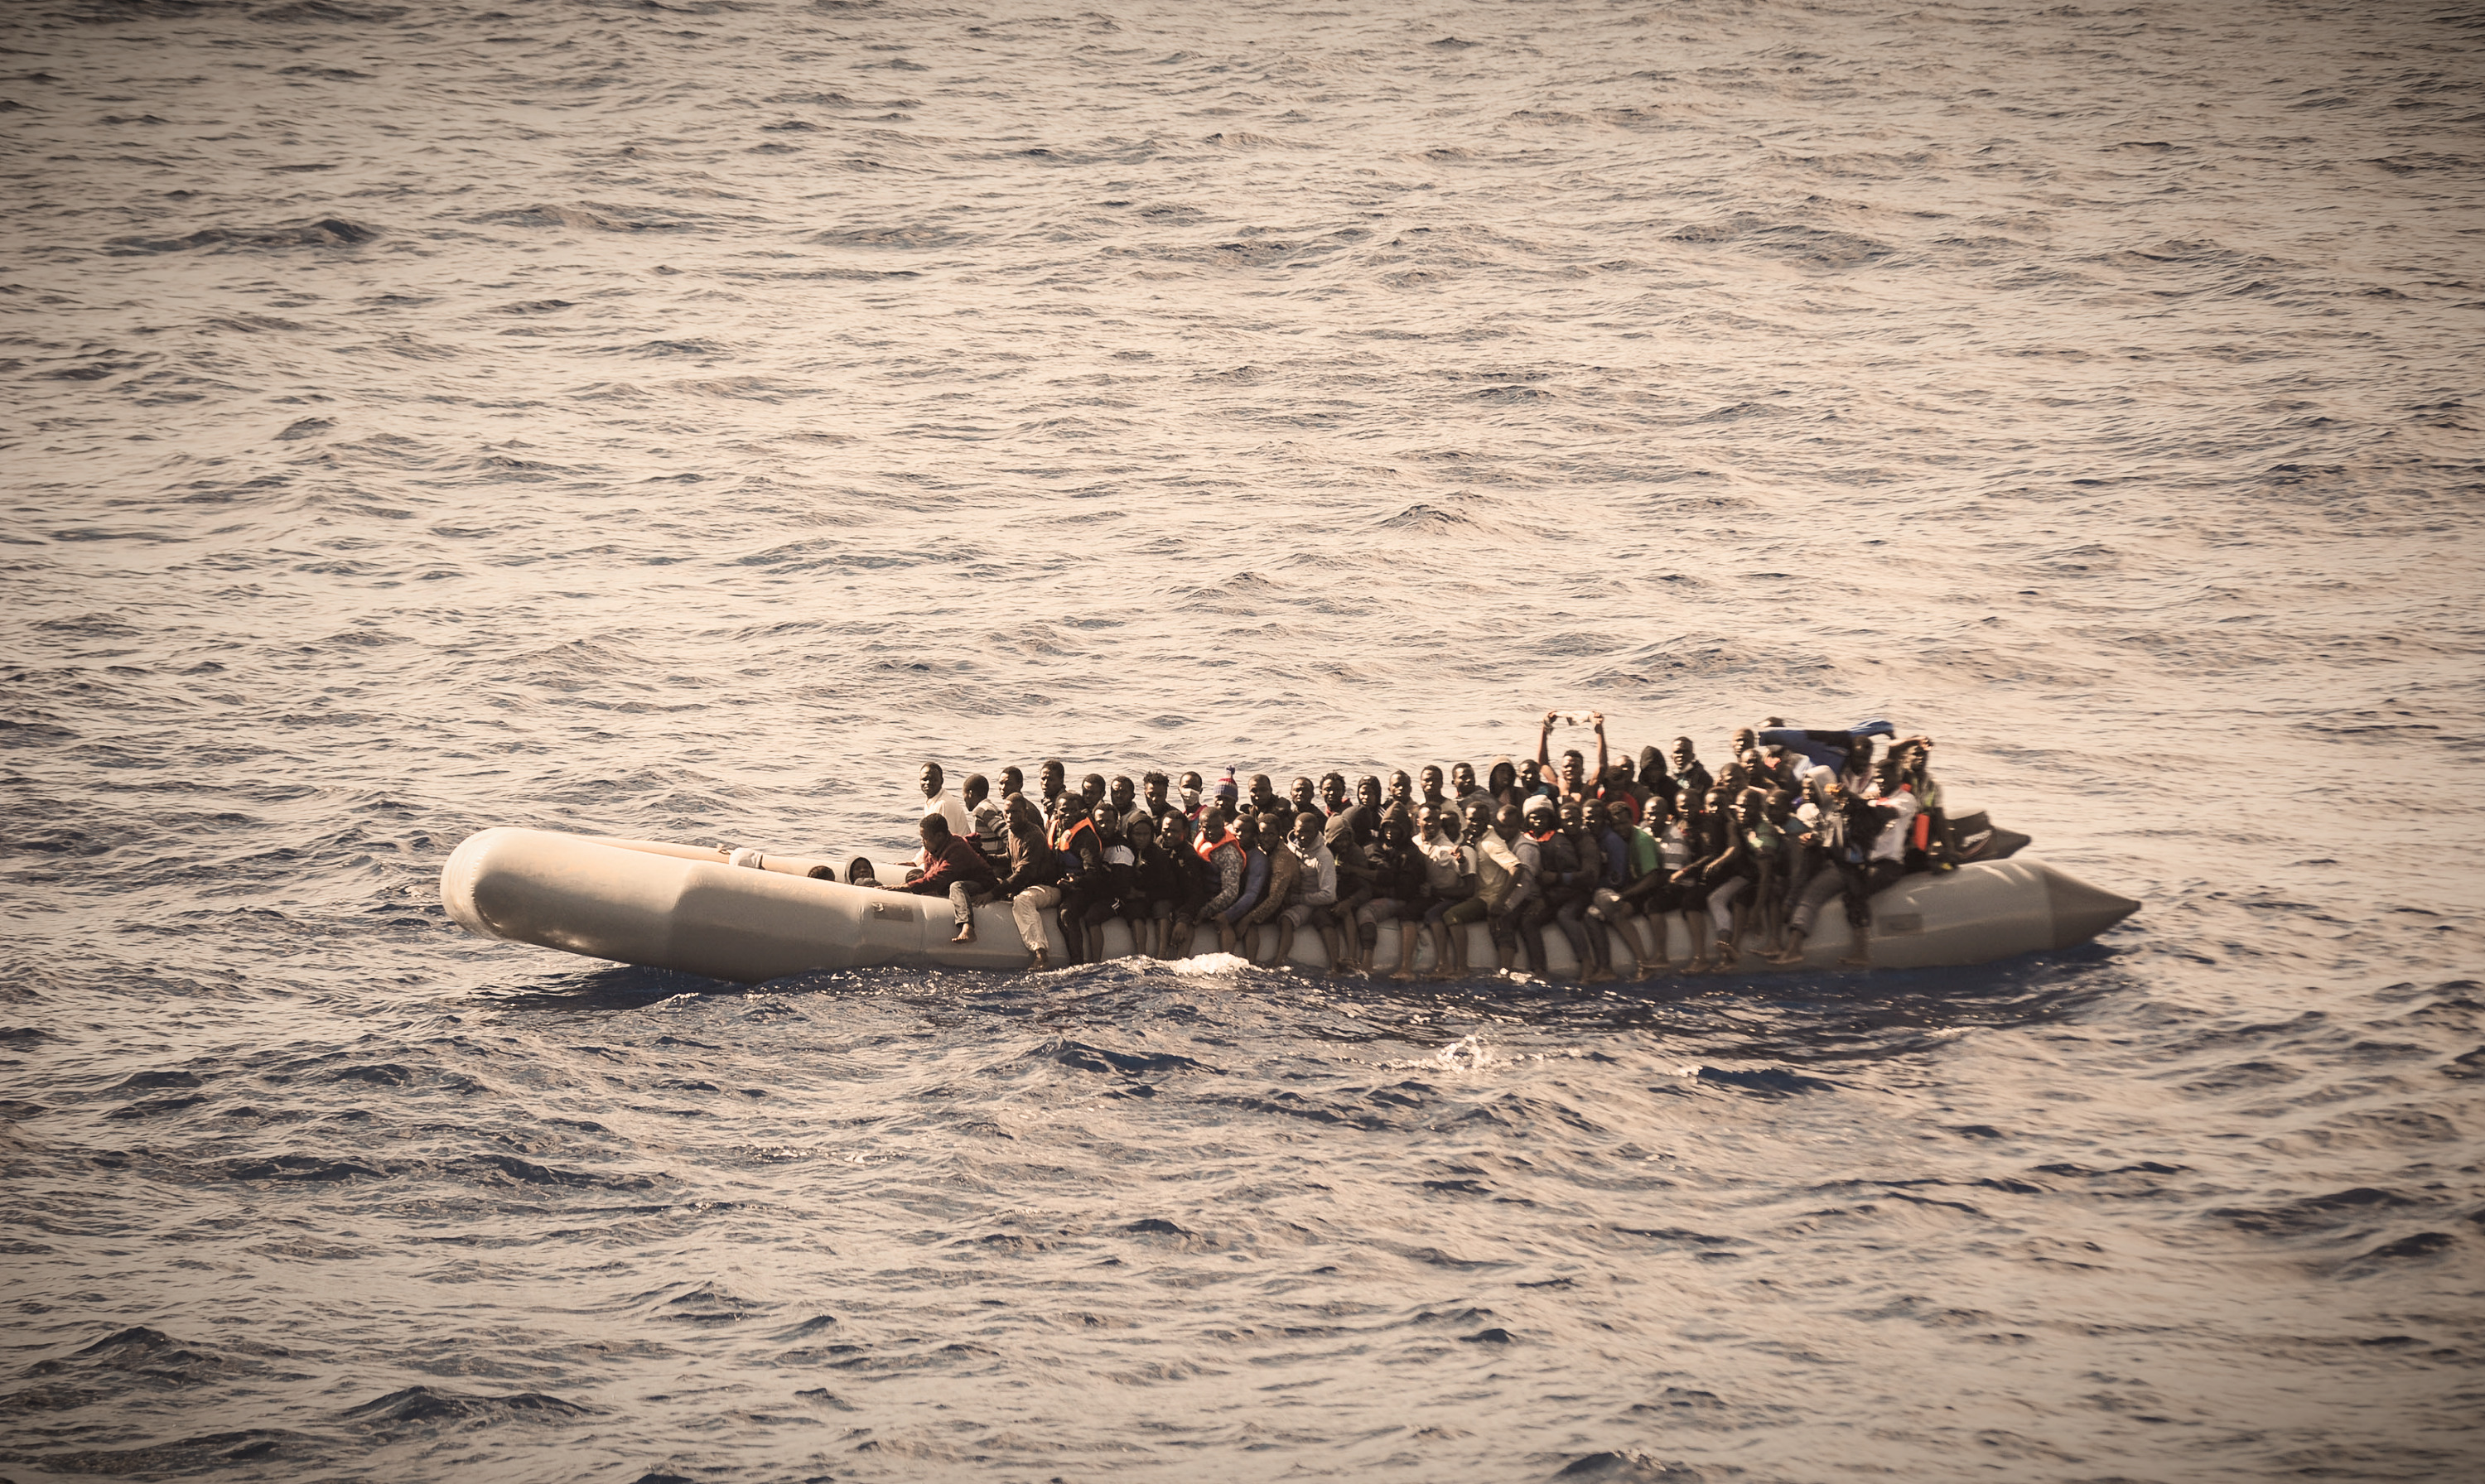 A raft filled with refugees (Shutterstock)